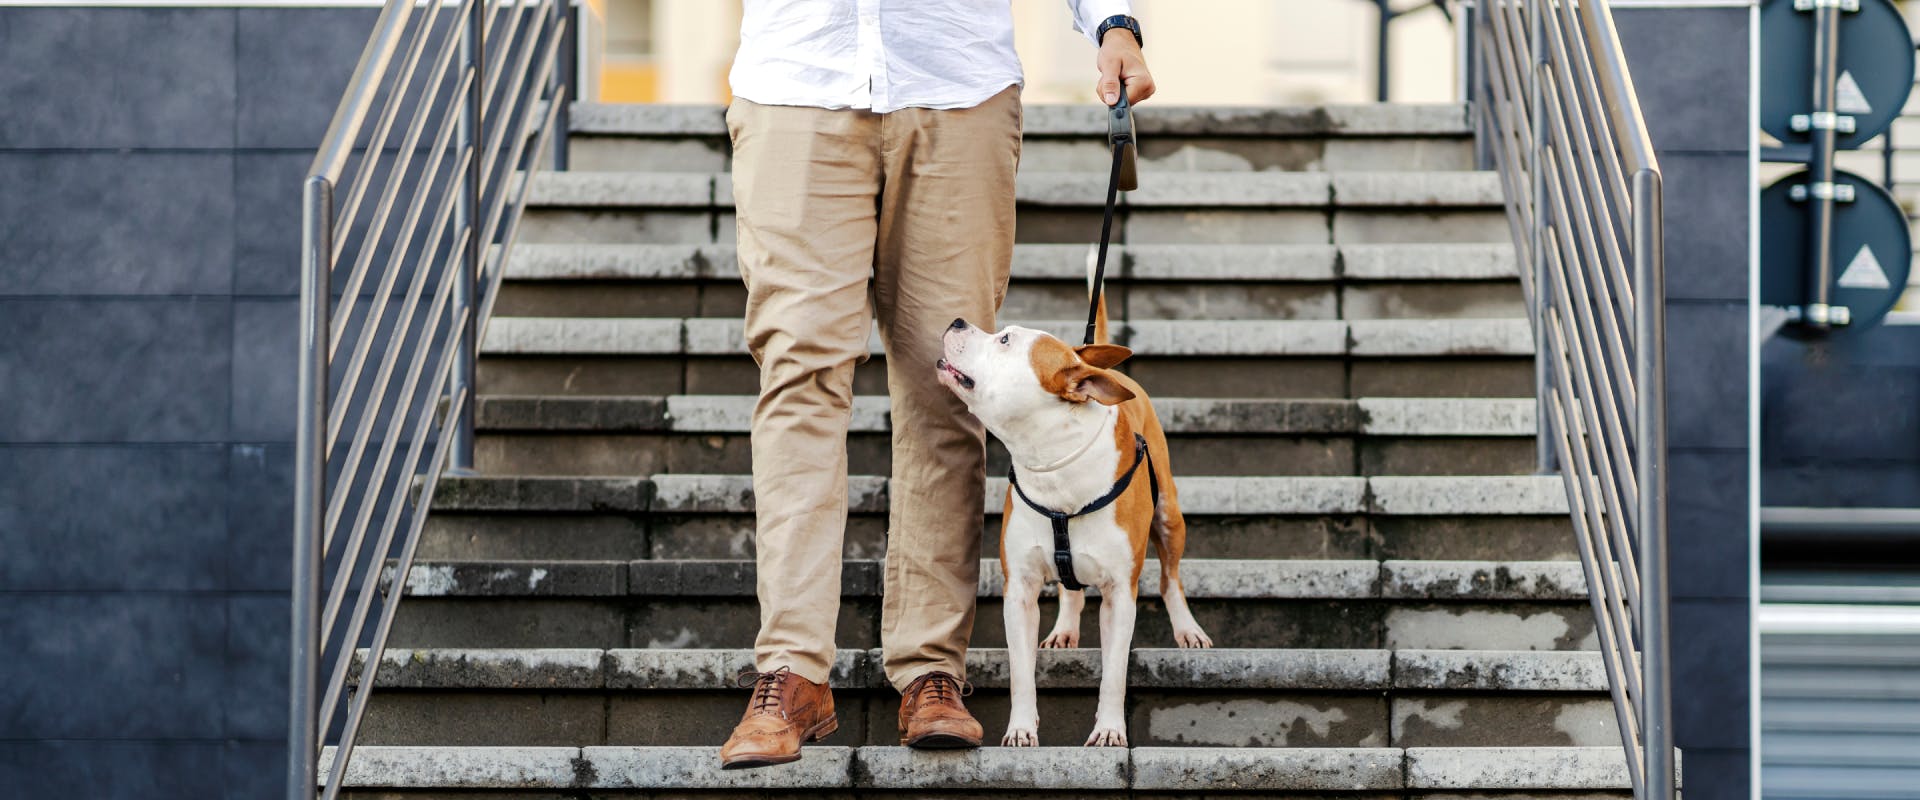 a white and tan short-haired dog stood next a human in a white shire walking down concrete steps outside an urban building